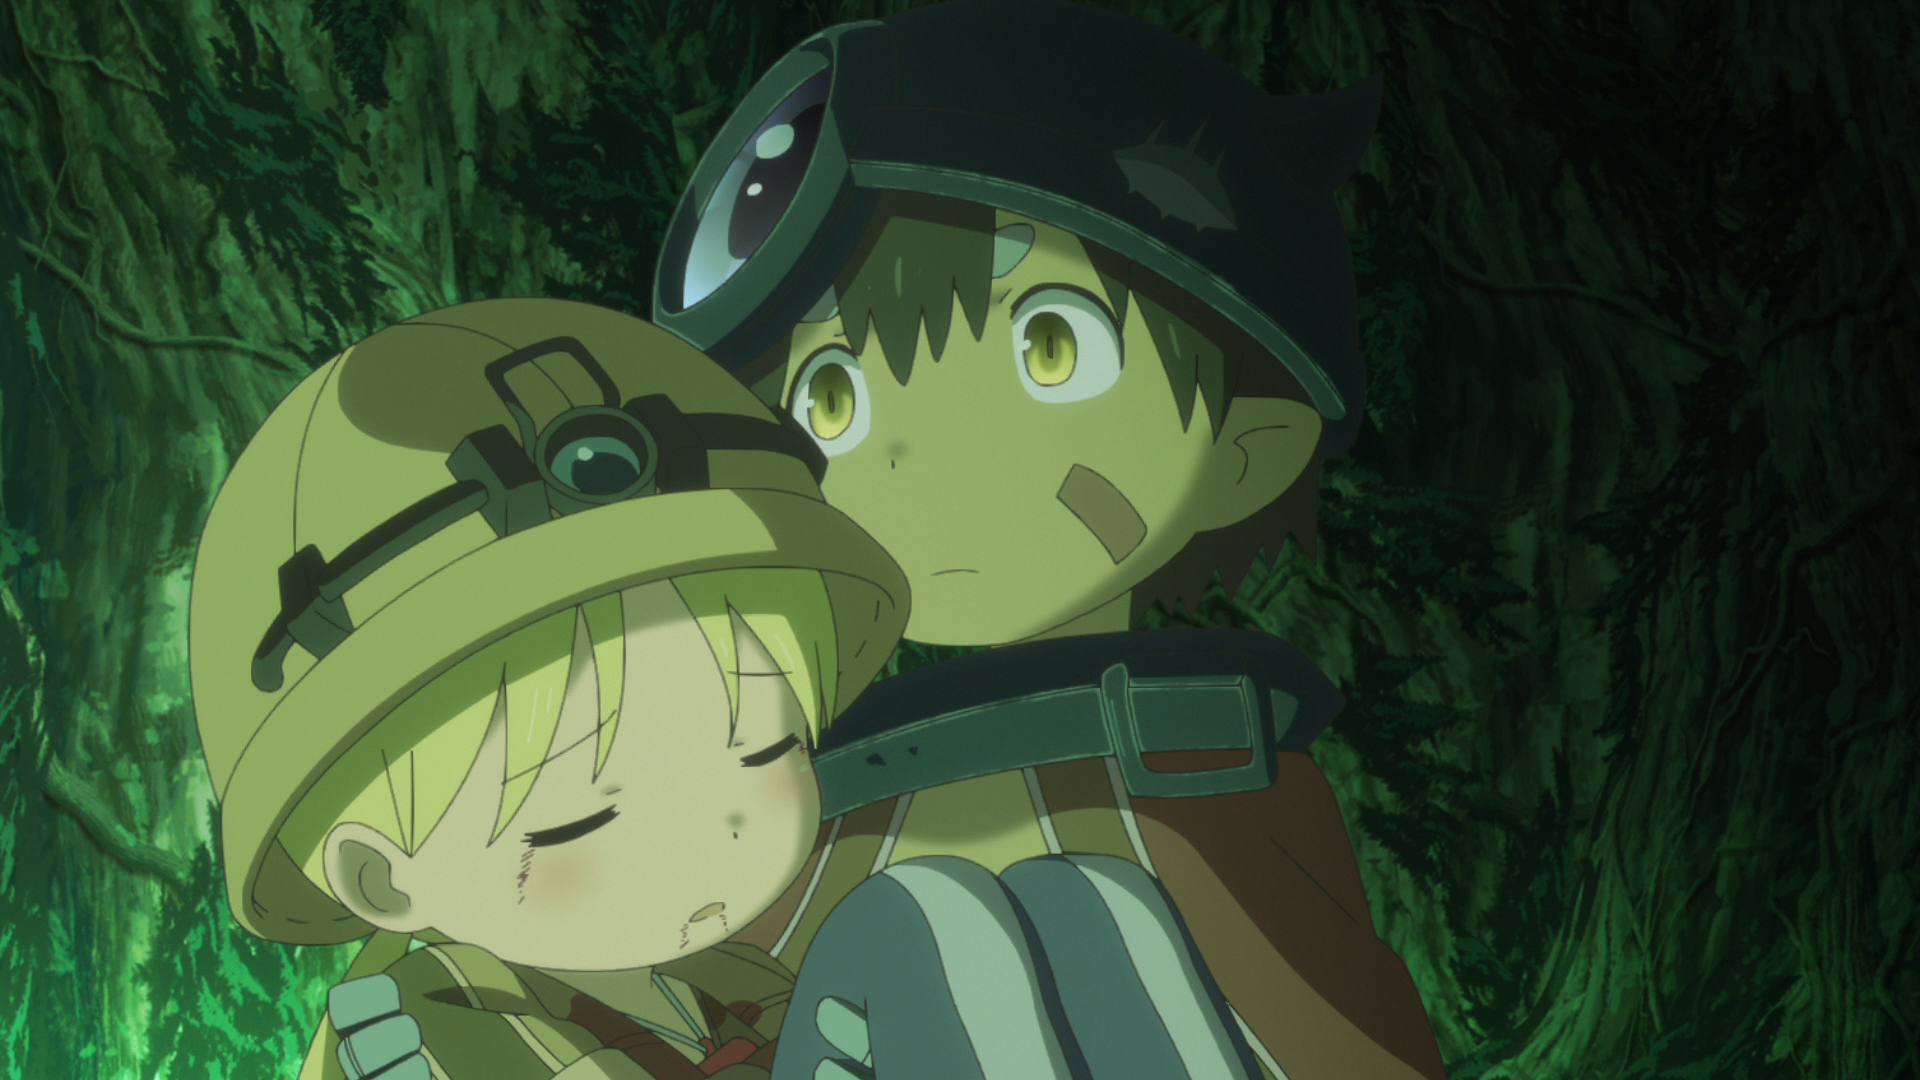 download made in abyss season 2